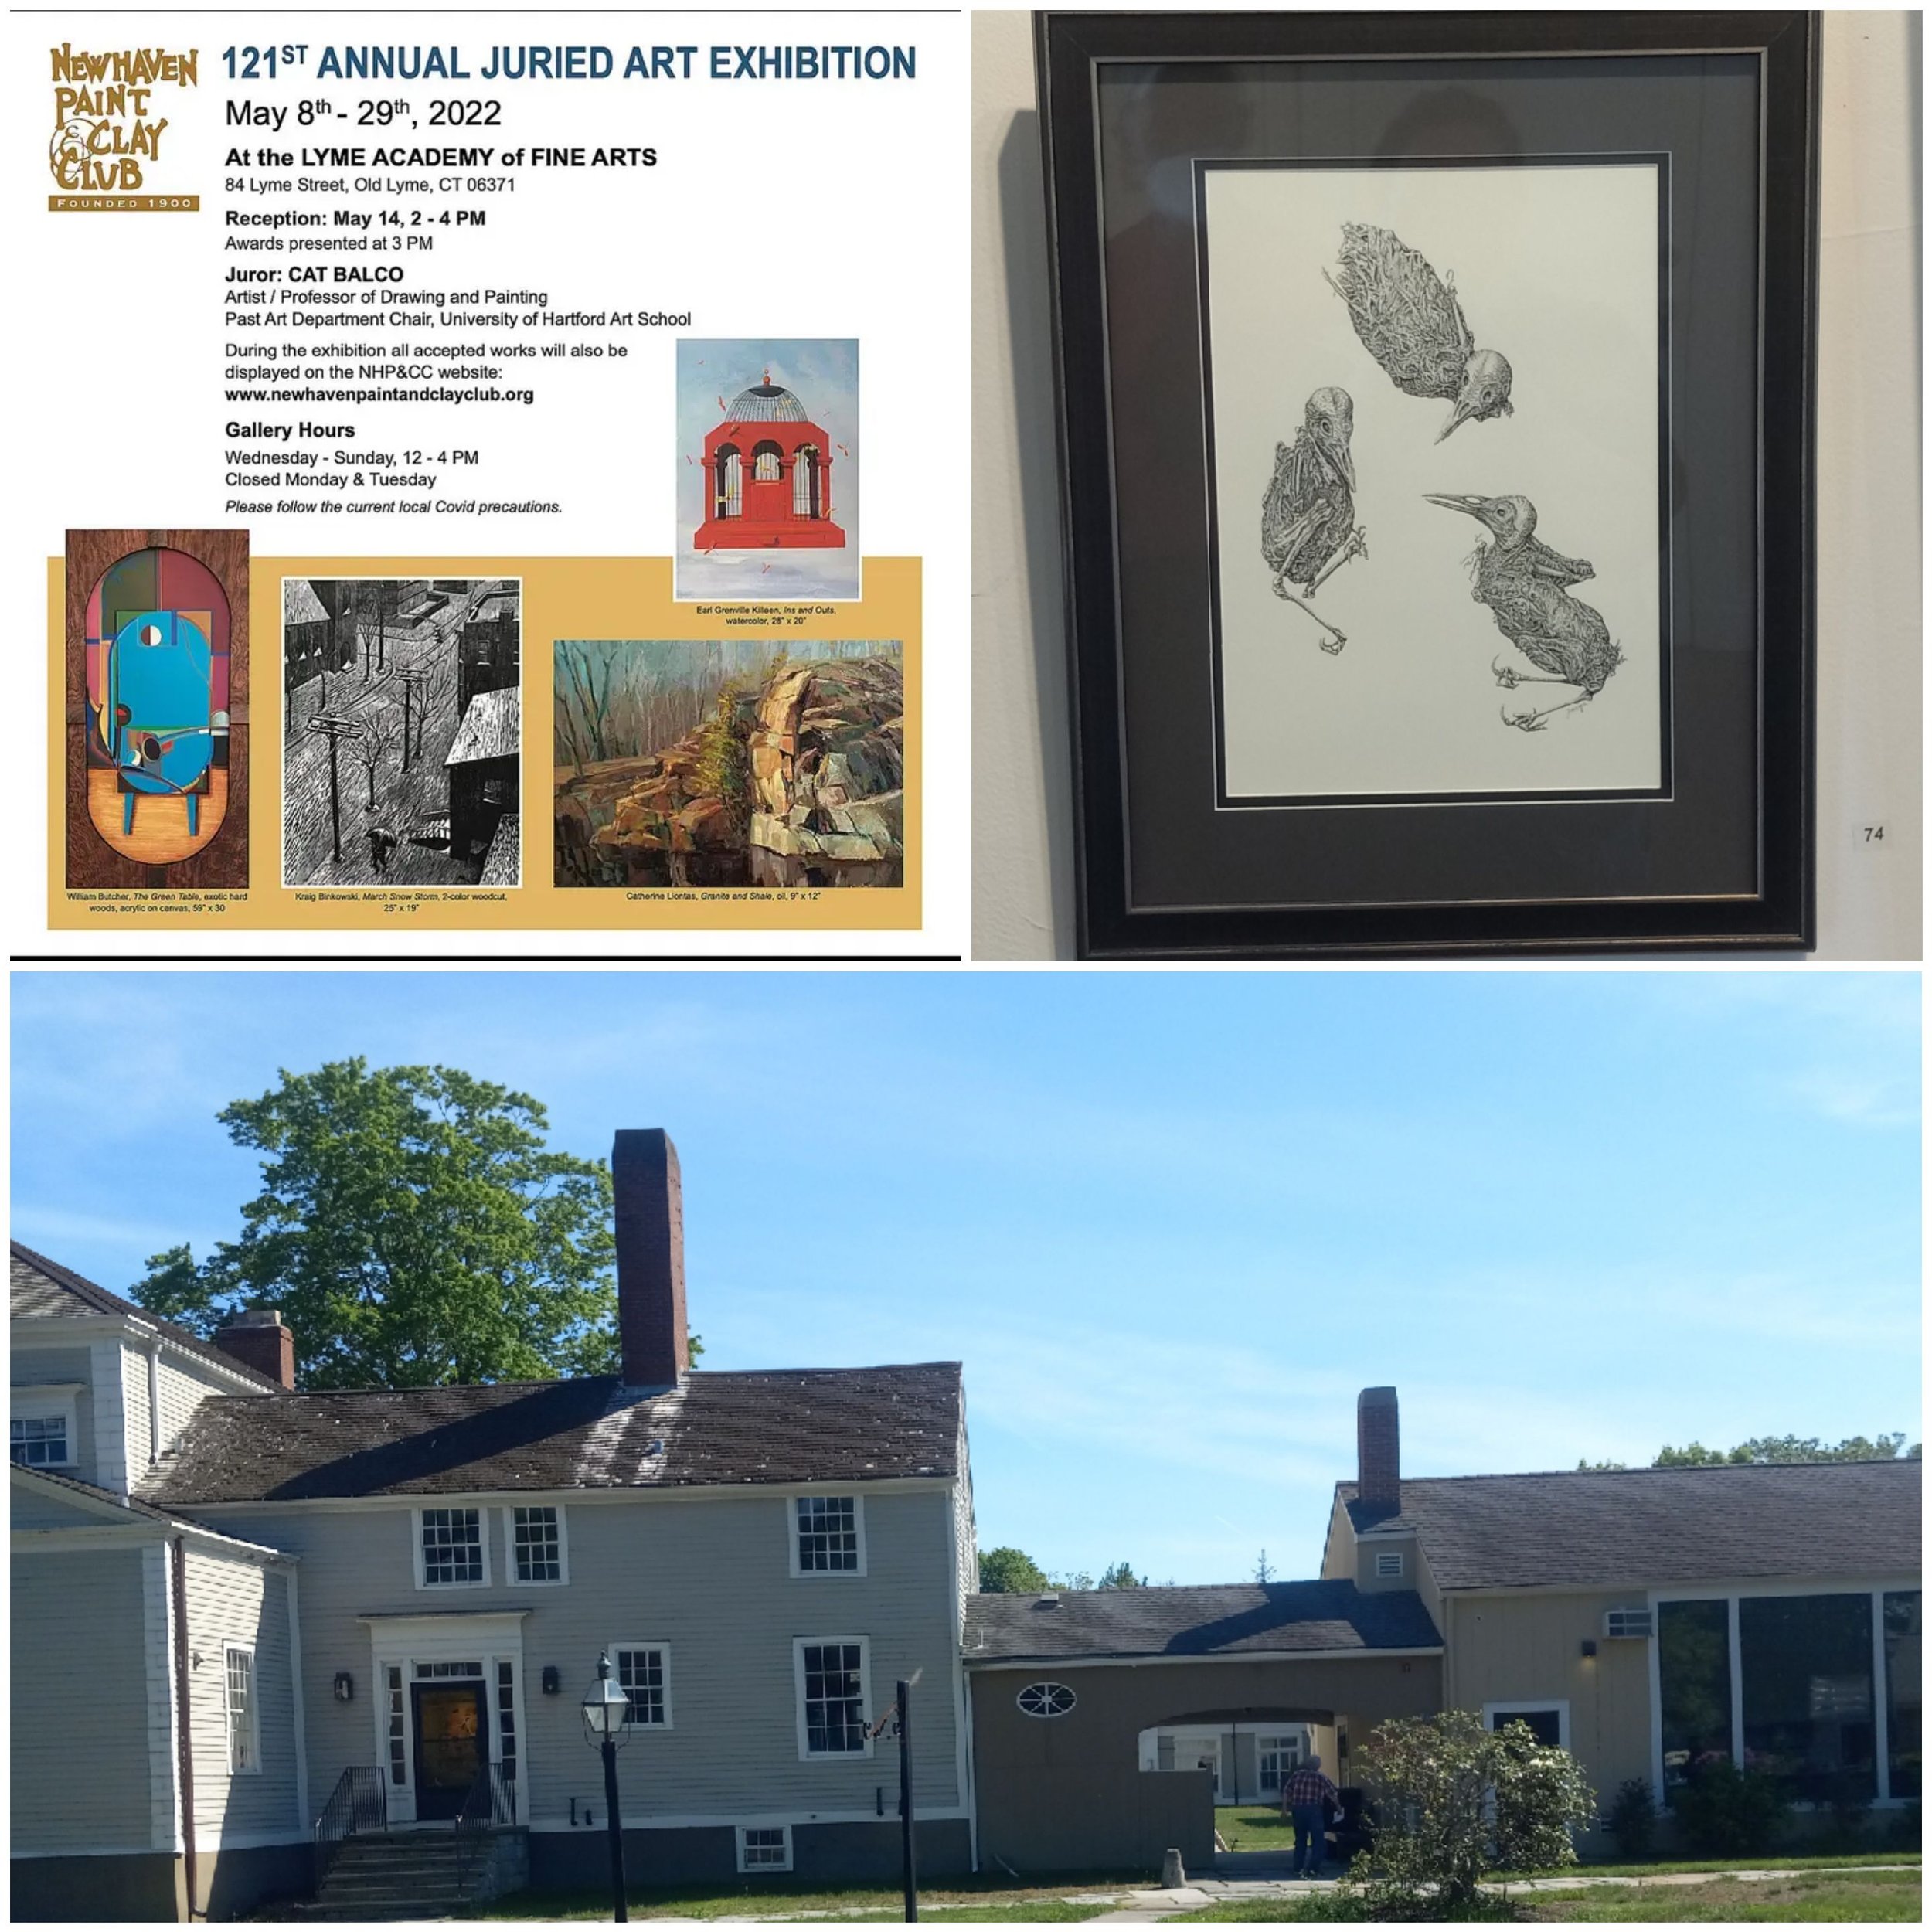 New Haven Paint and Clay Club's 121st Annual Art Exhibition 